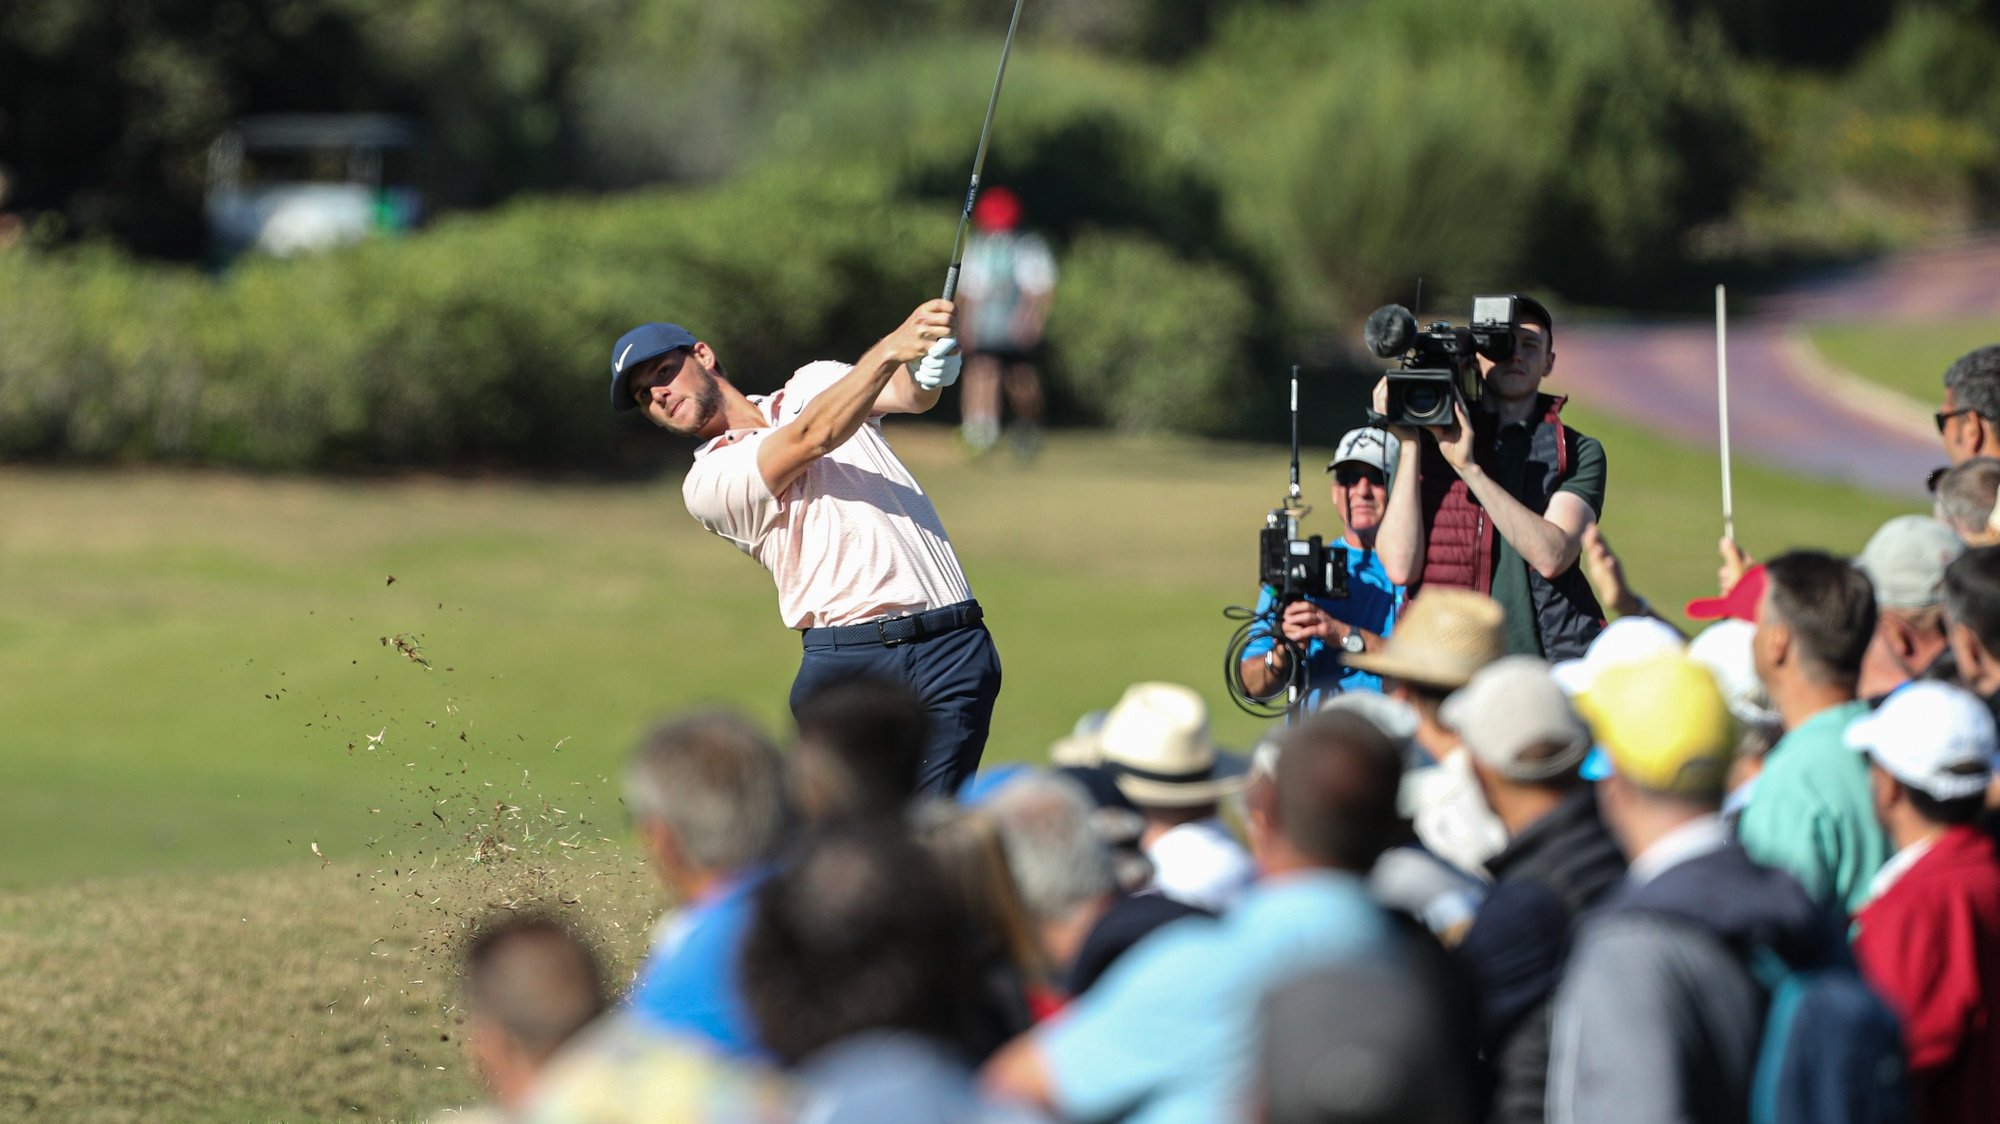 Belgium golfer Thomas Pieters in action during the Portugal Masters 2021 tournament in Vilamoura, southern Portugal, 07 November 2021. Thomas Pieters win the Portugal Masters 2021. LUIS FORRA/LUSA